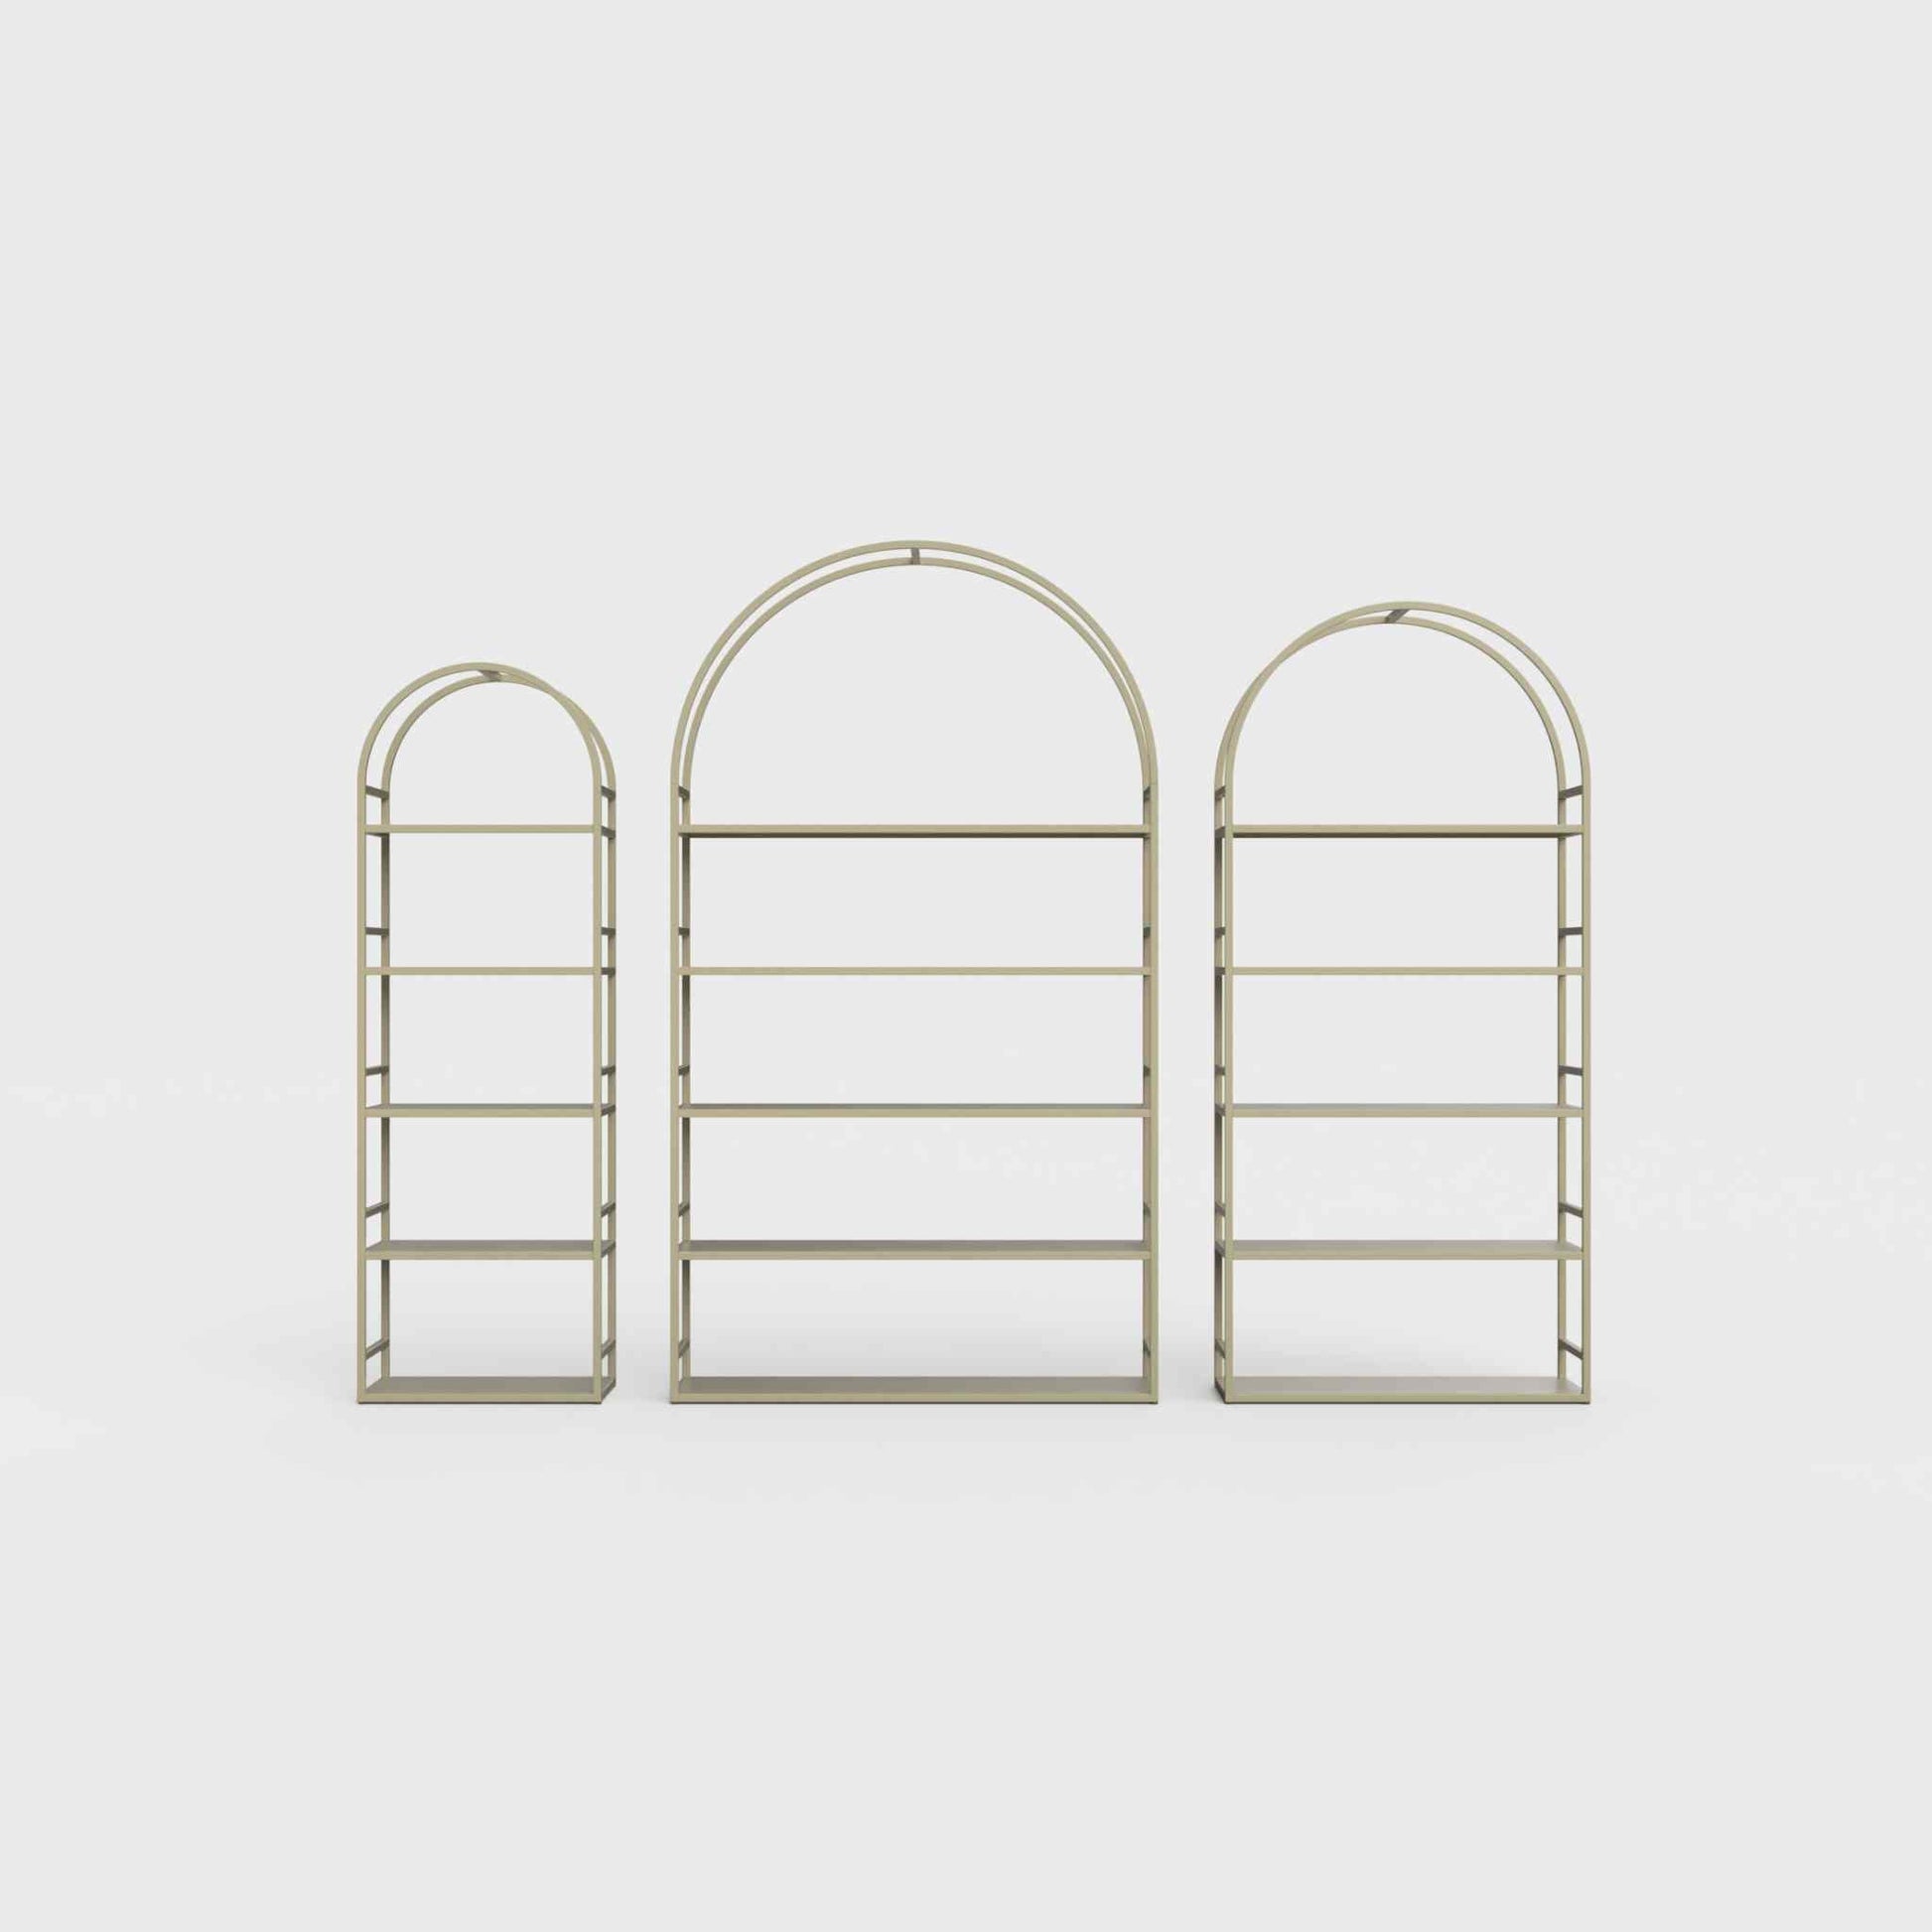 Arched bookcase Arkada, available in Switzerland through ÉTAUDORÉ, made from highest quality powdered coated steel in light olive color